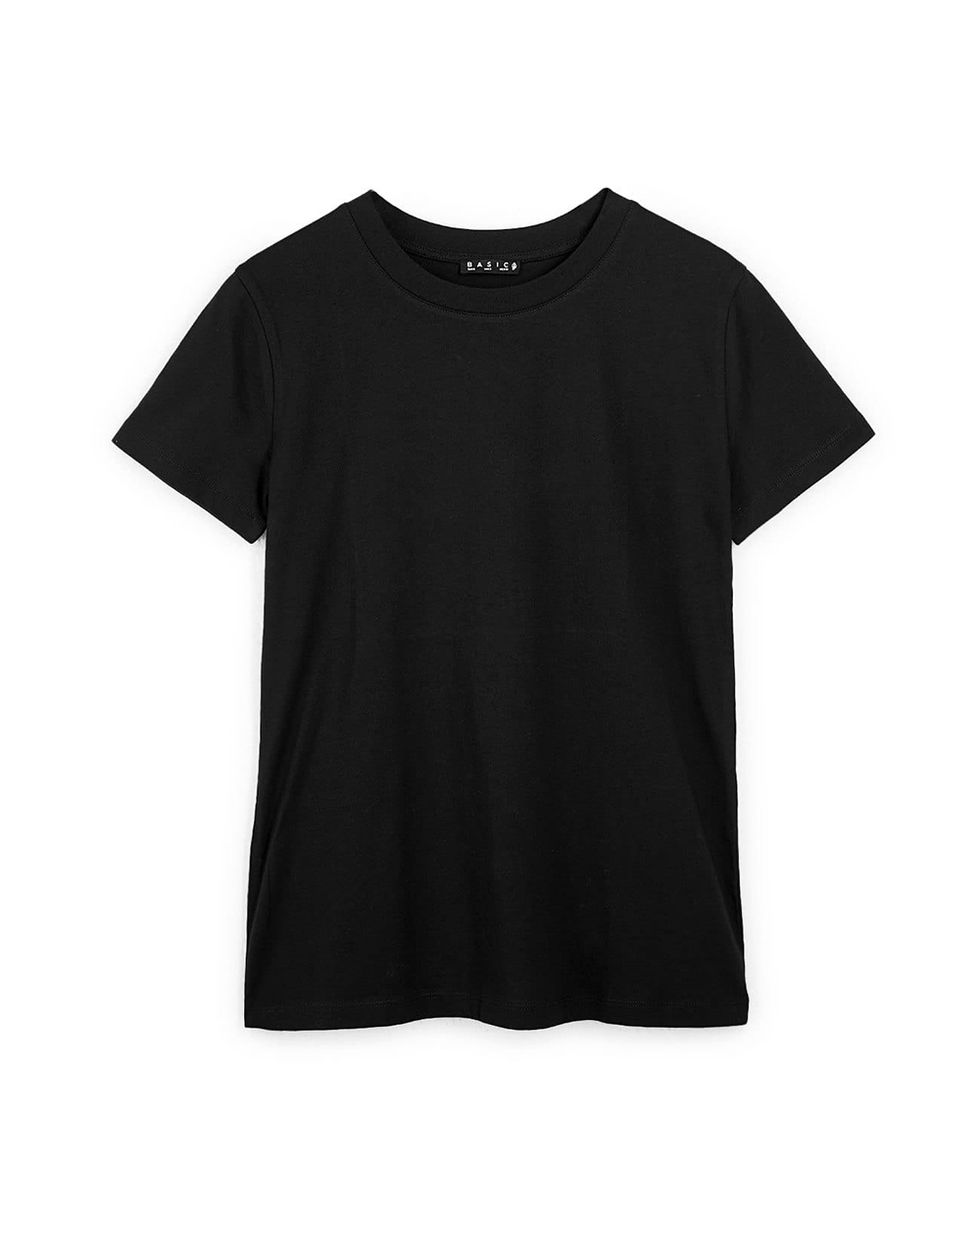 Clothing, T-shirt, Black, White, Sleeve, Top, Neck, Active shirt, Blouse, Crop top, 